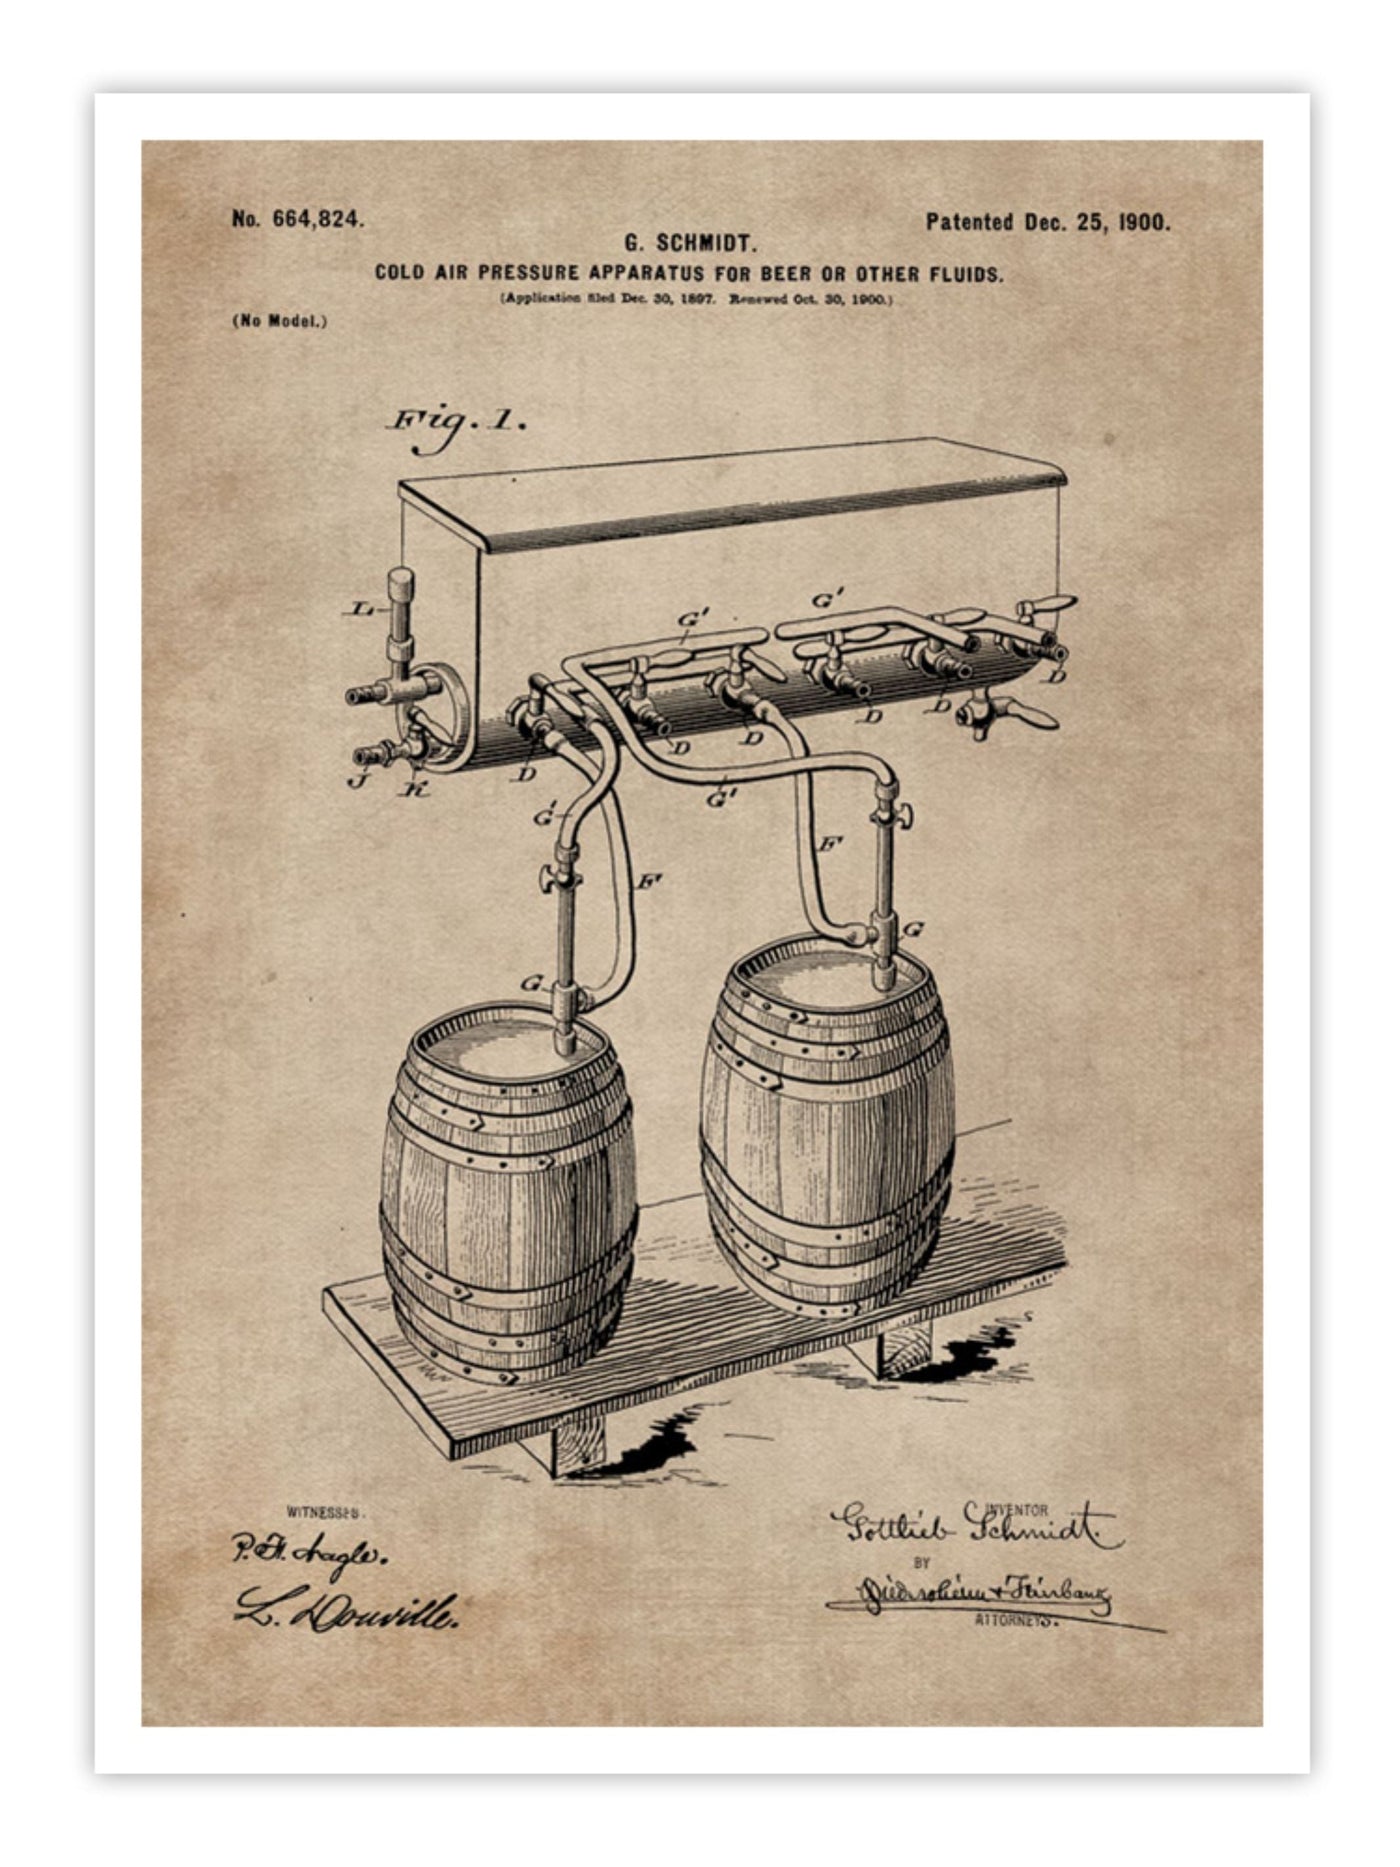 Patent Document of a Cold Air Pressure Apparatus for Beer Wall Prints